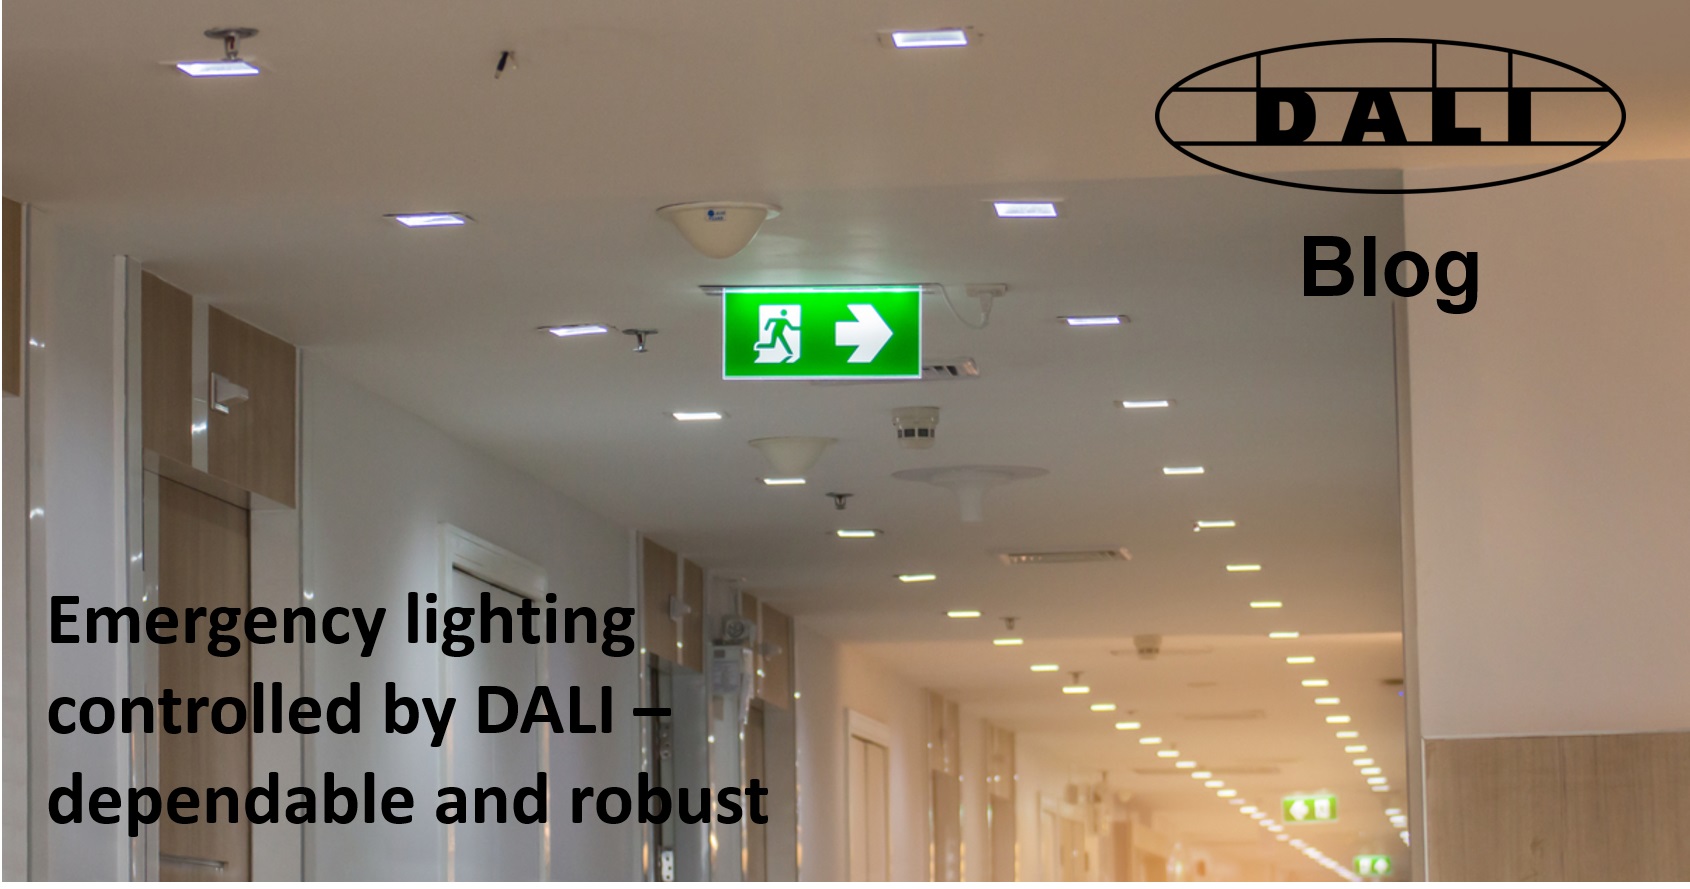 Emergency lighting controlled by DALI that's dependable and robust